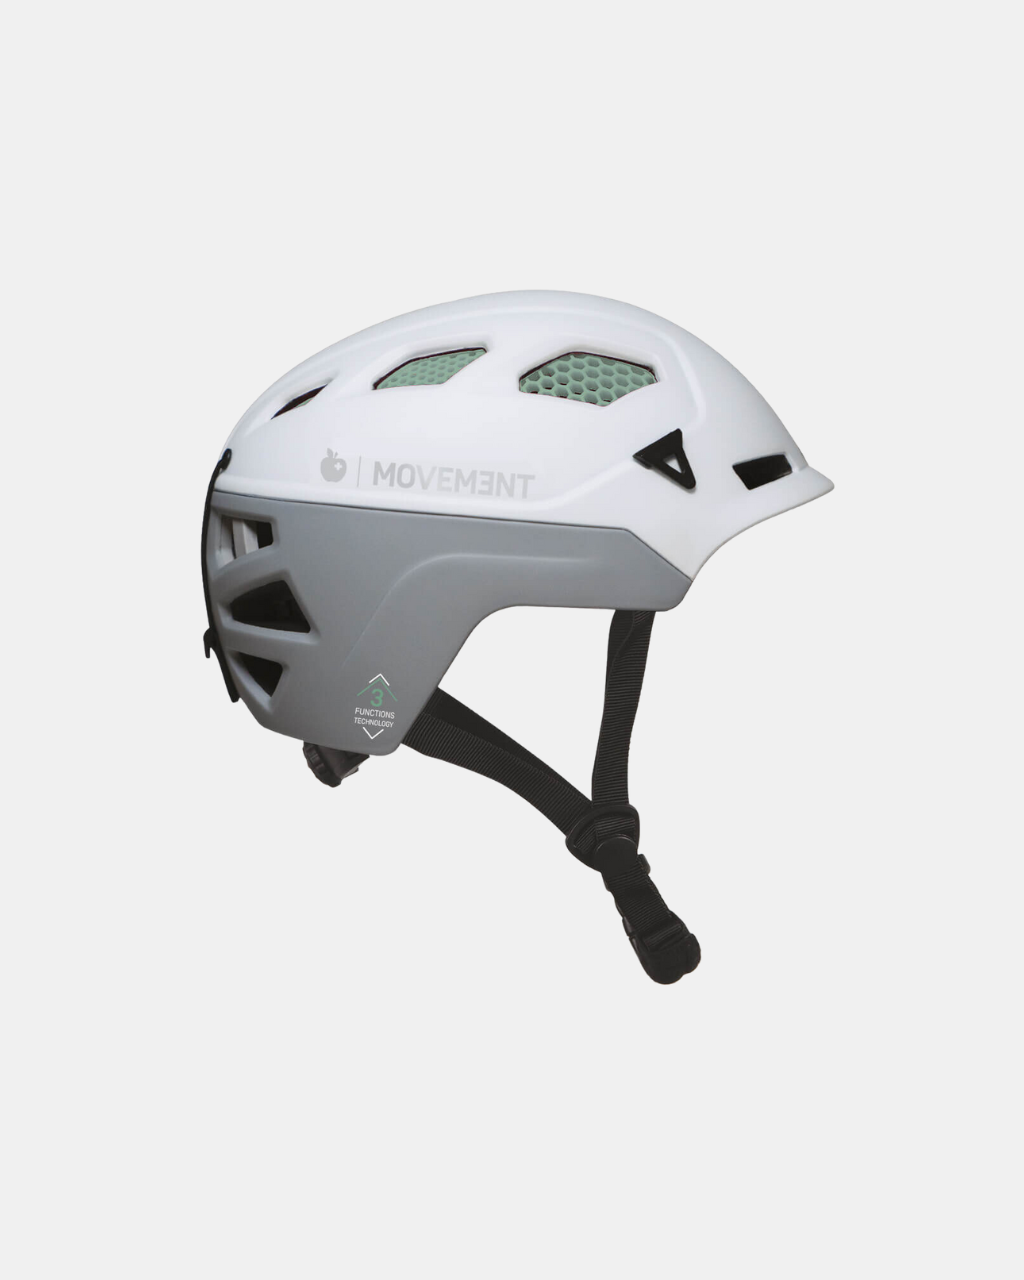 The Movement 3Tech Alpi water green helmet: where safety meets style for the modern explorer.